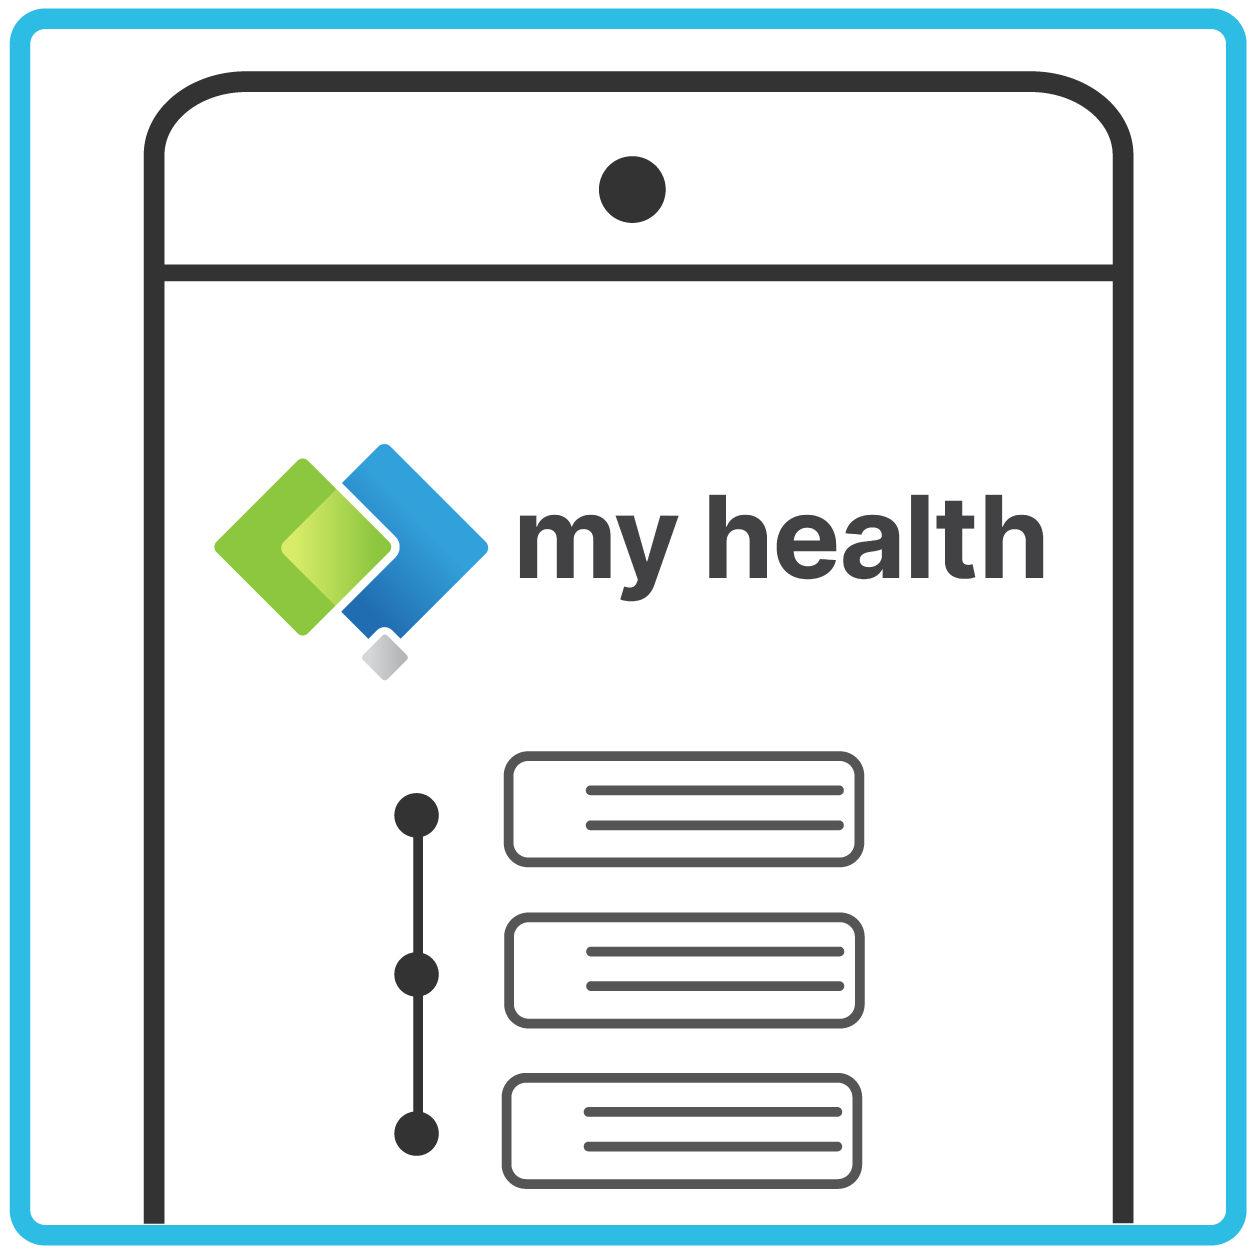 Using the my health app's medical history timeline